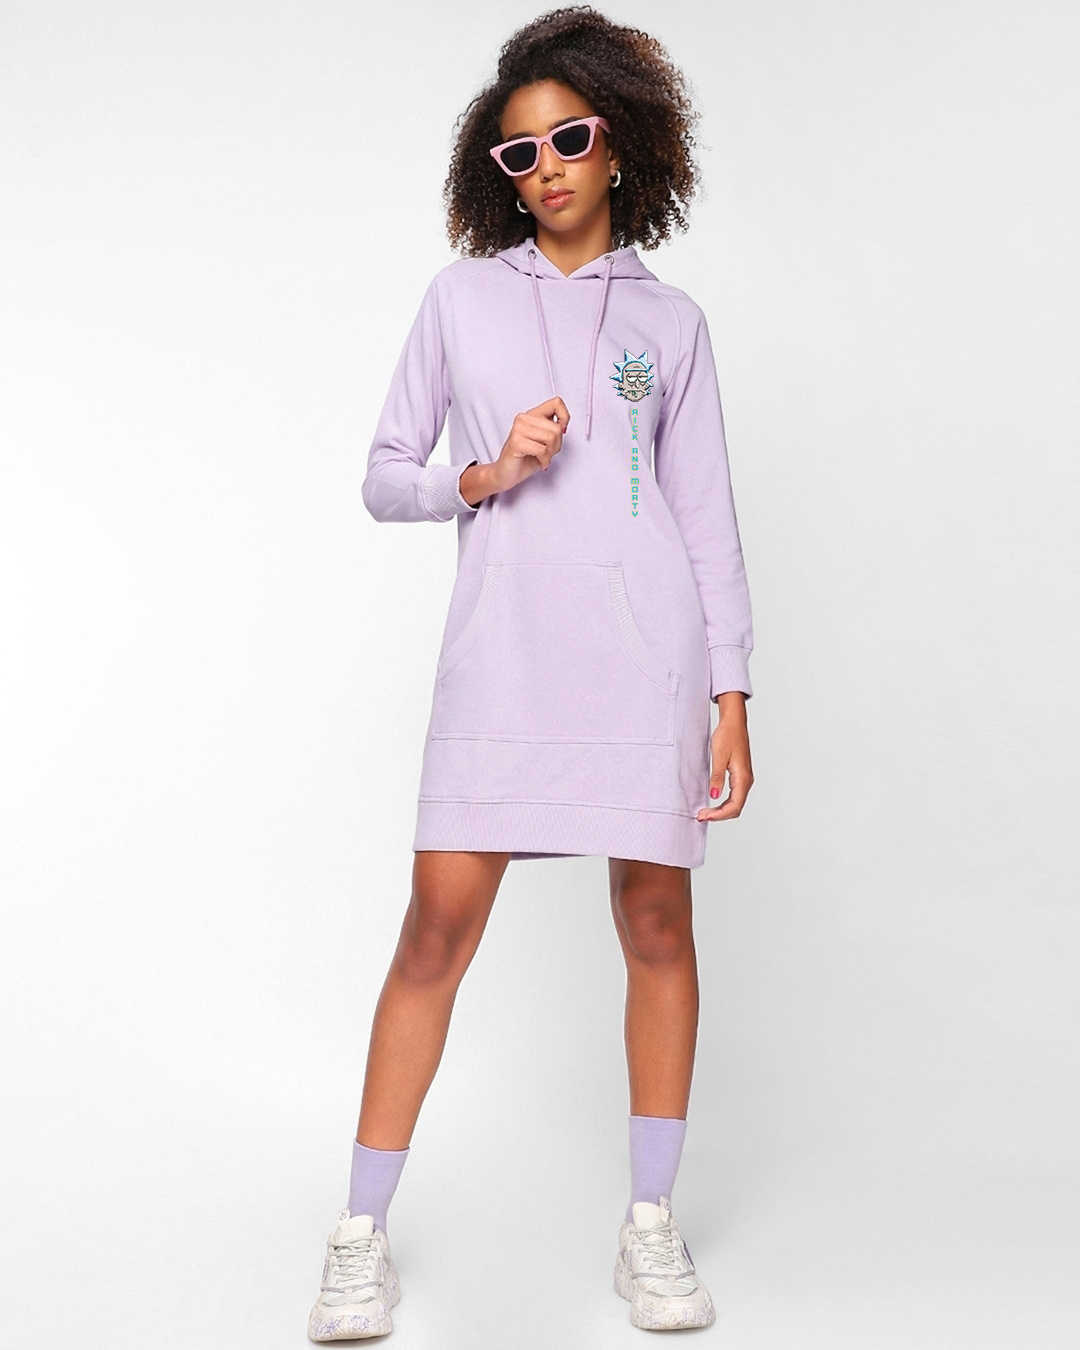 Shop Women's Purple Rick and Morty Graphic Printed Hoodie Dress-Back